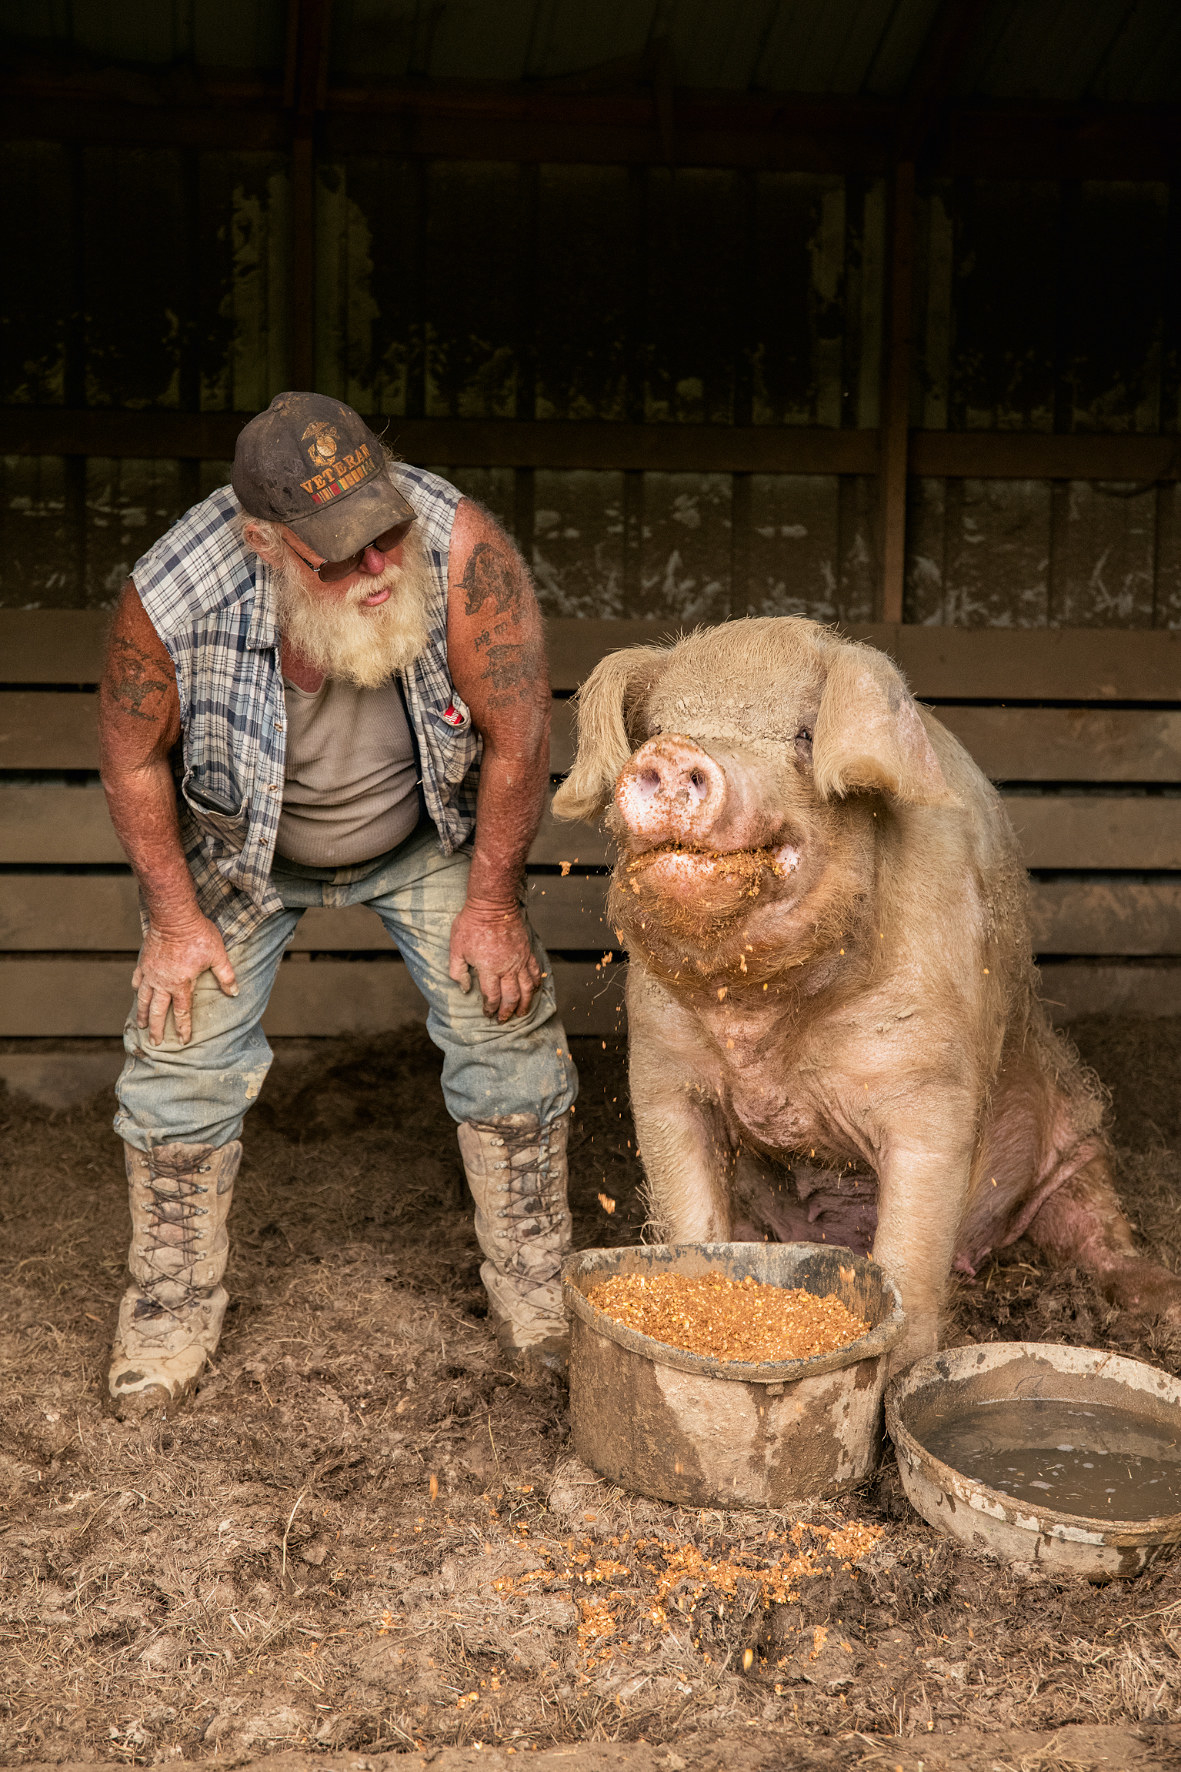 a man bends down to watch a large pig as it eats